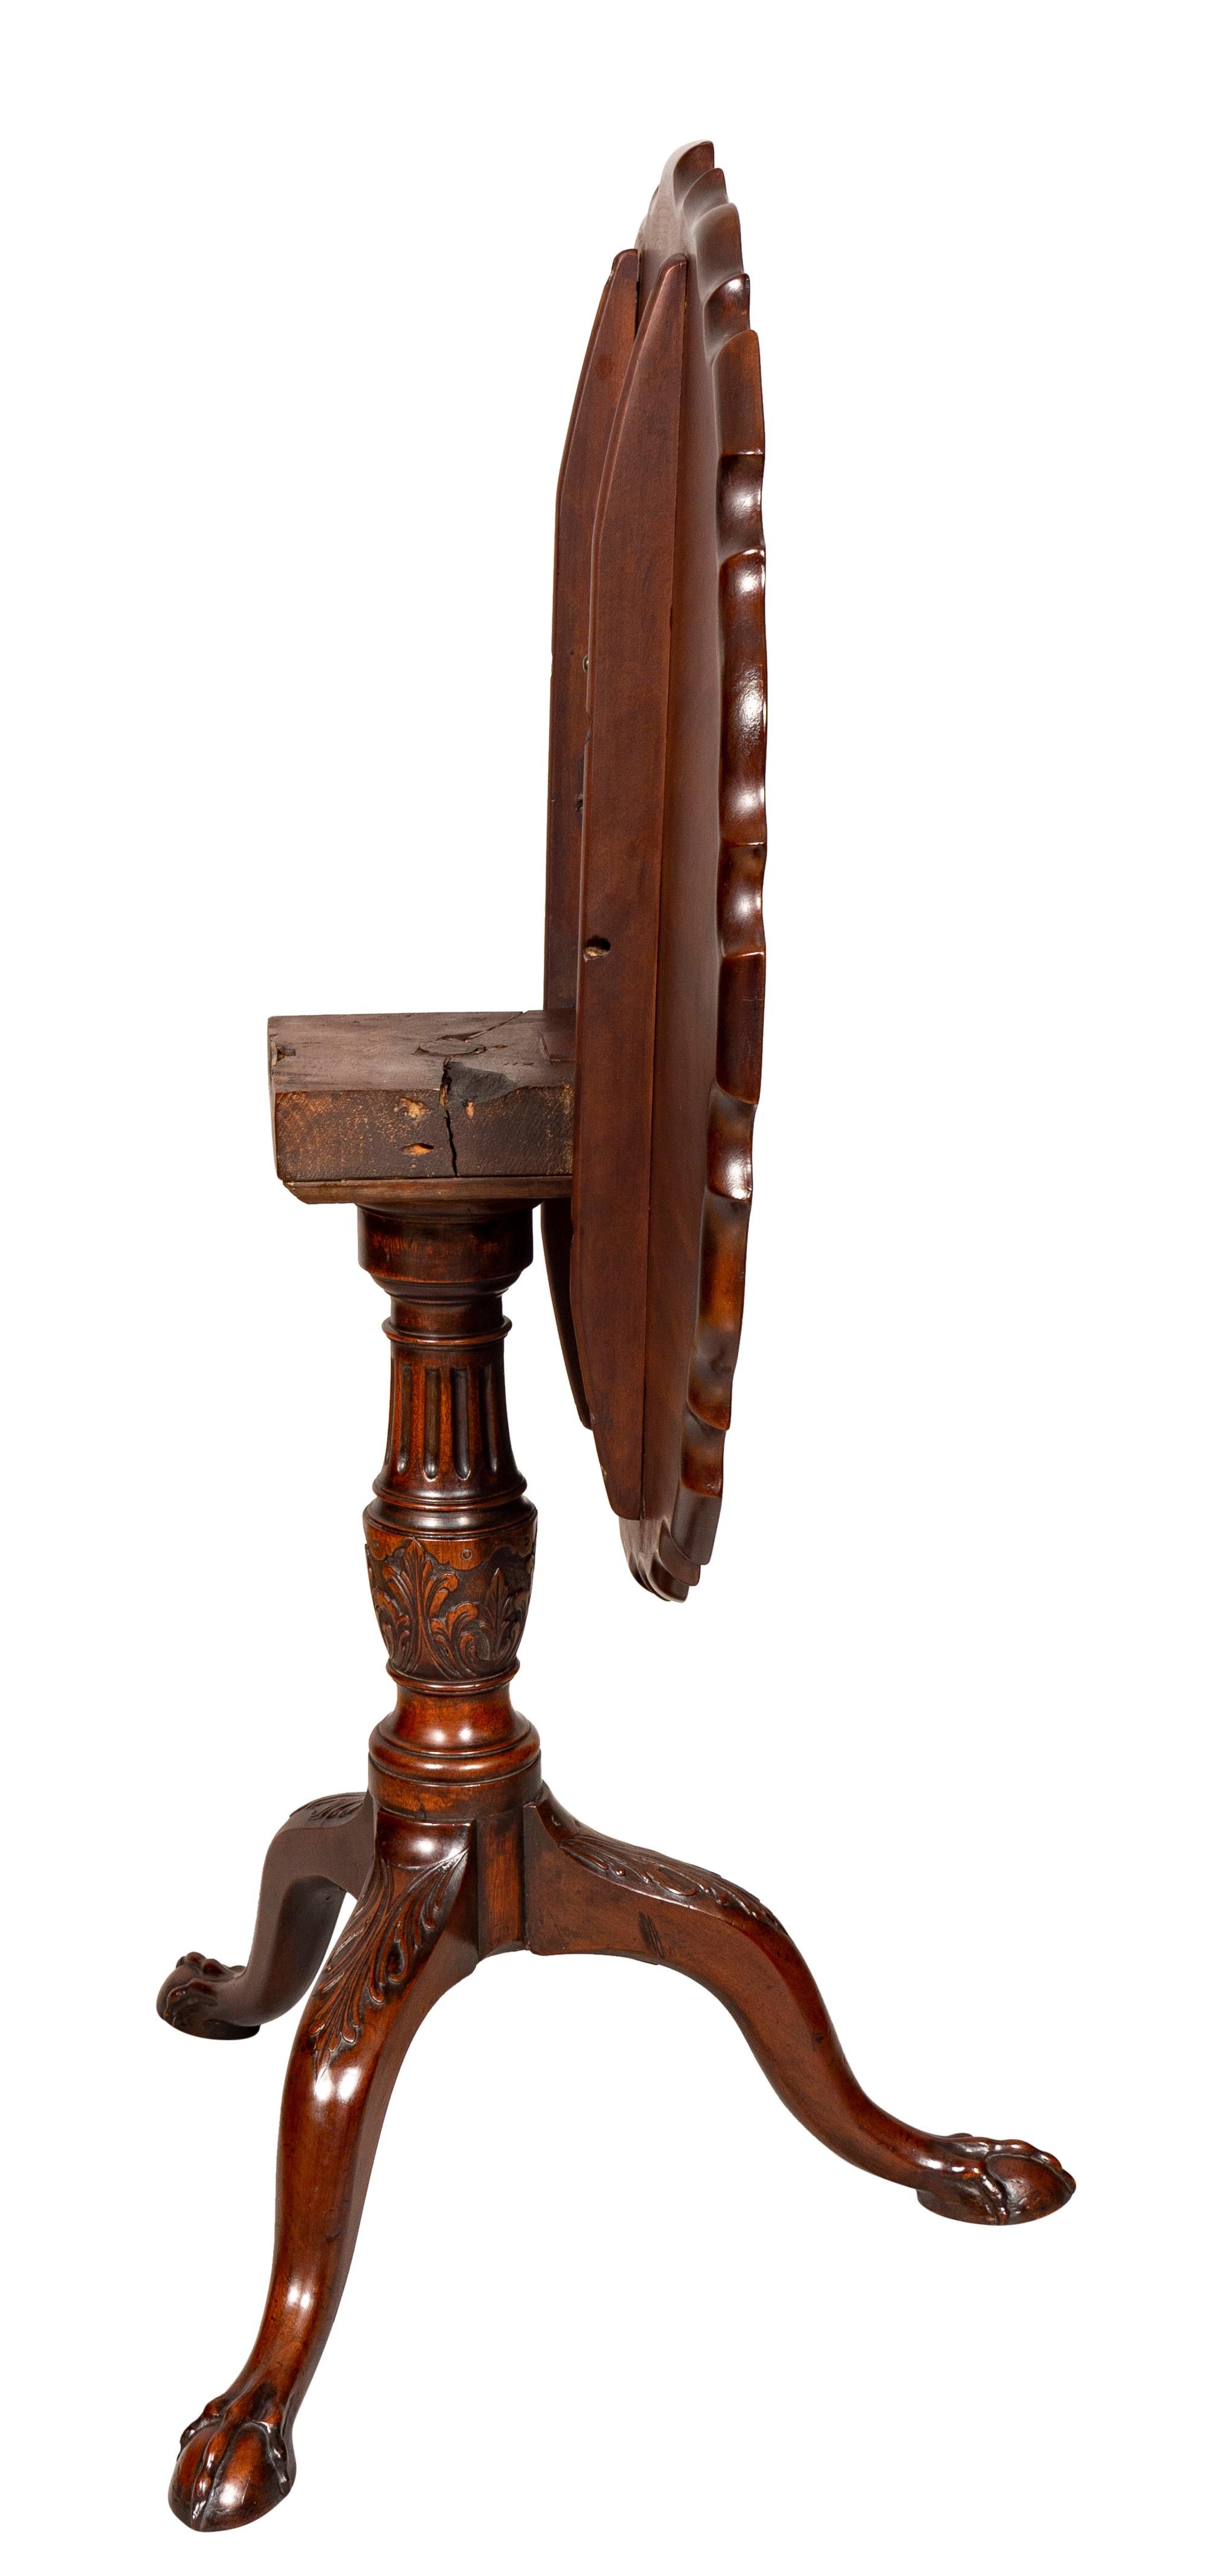 Crcular hinged top with piecrust carved edge, raised on a carved support and joined by three cabriole legs with carved knees and ending on flattened ball and claw feet.